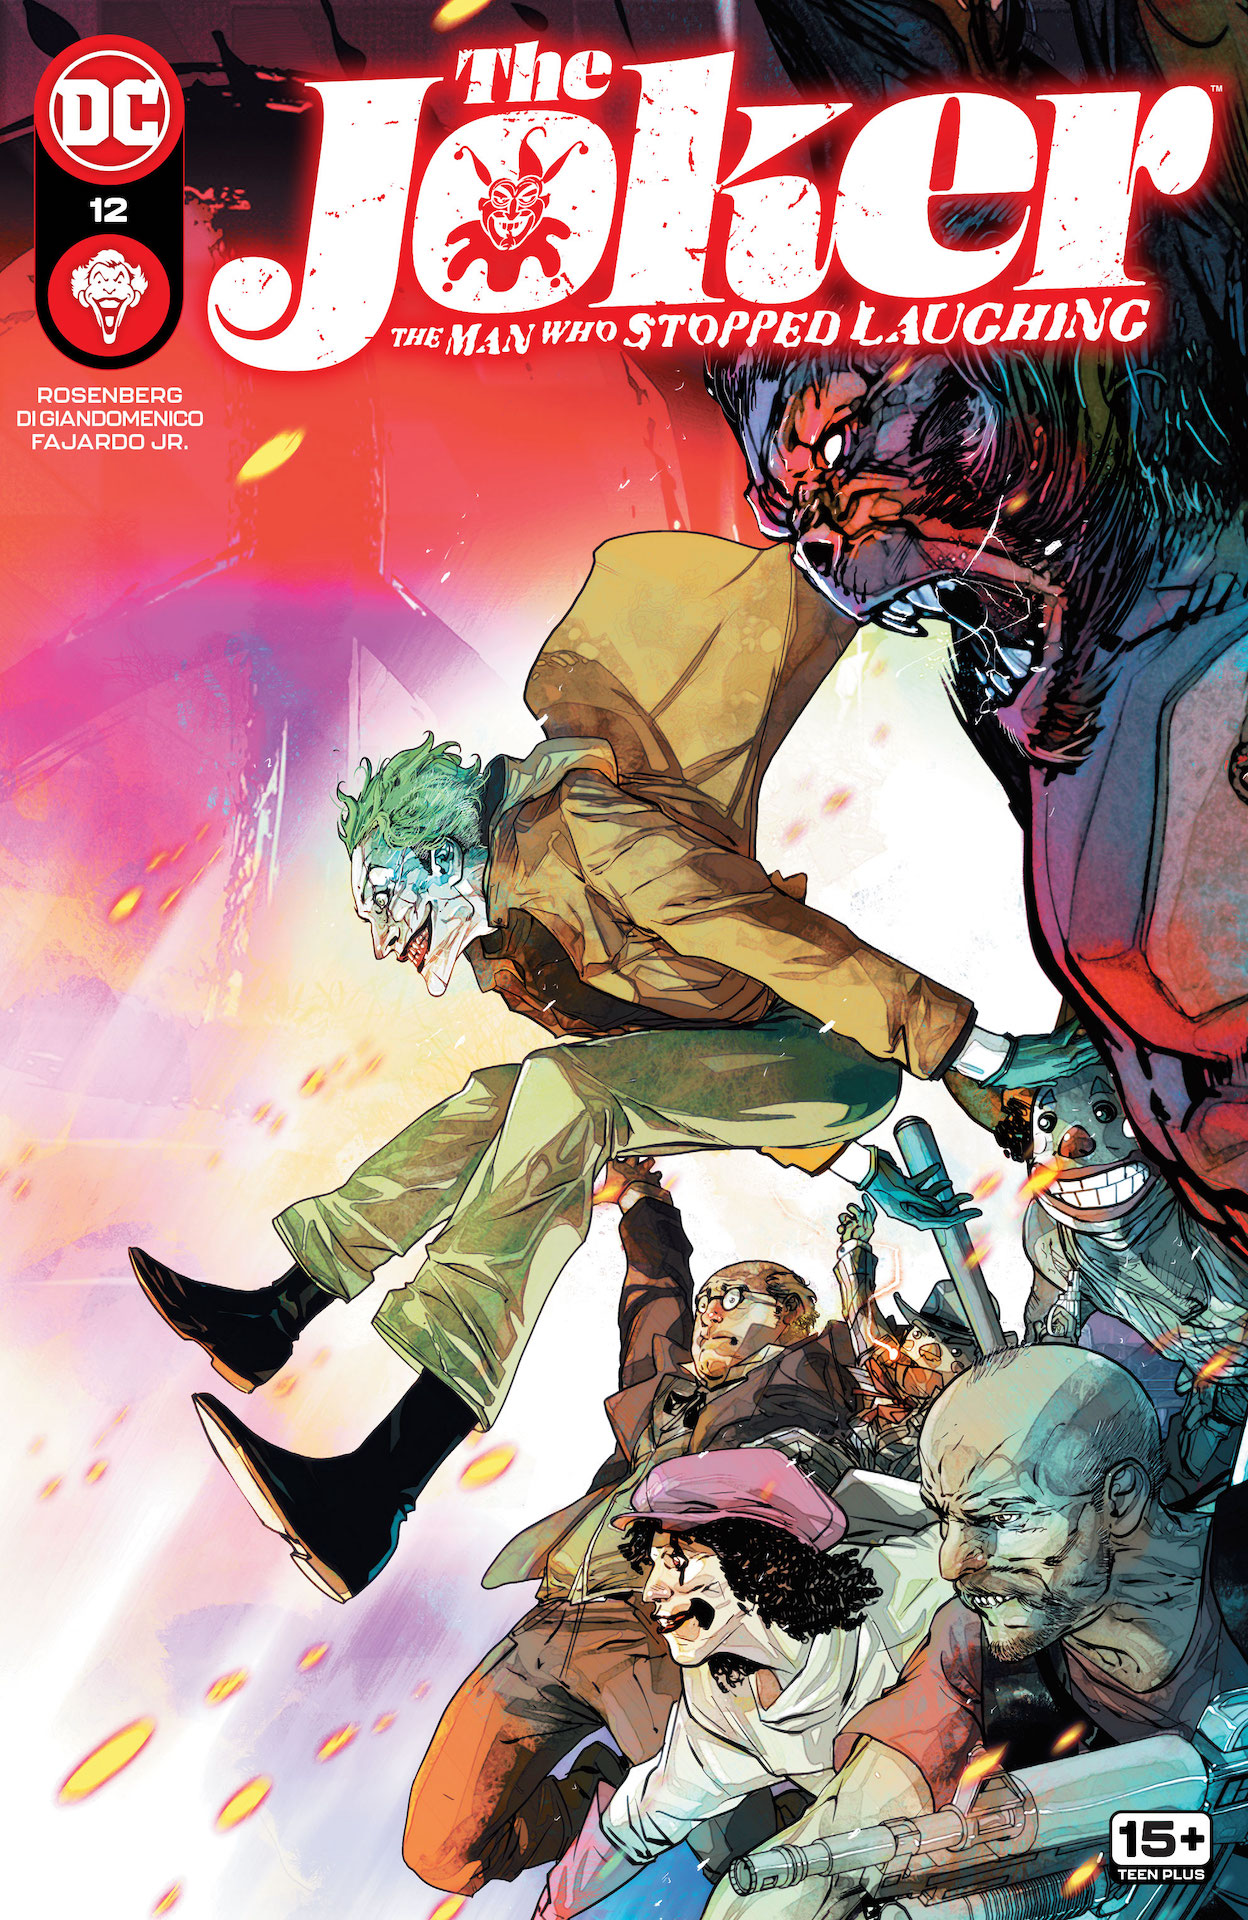 DC Preview: The Joker: The Man Who Stopped Laughing #12